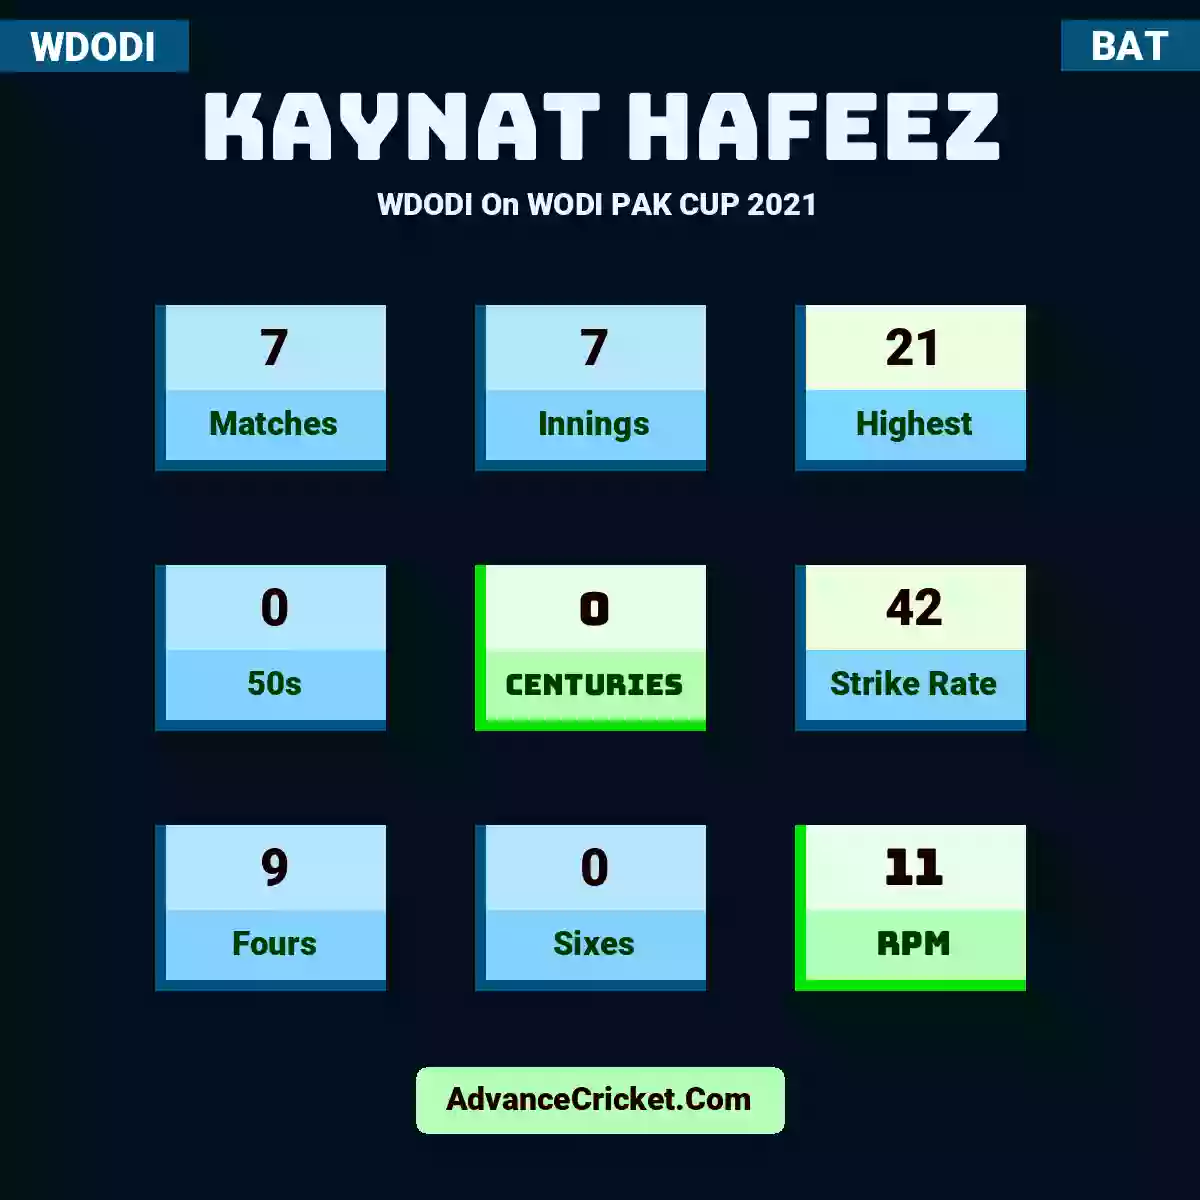 Kaynat Hafeez WDODI  On WODI PAK CUP 2021, Kaynat Hafeez played 7 matches, scored 21 runs as highest, 0 half-centuries, and 0 centuries, with a strike rate of 42. K.Hafeez hit 9 fours and 0 sixes, with an RPM of 11.